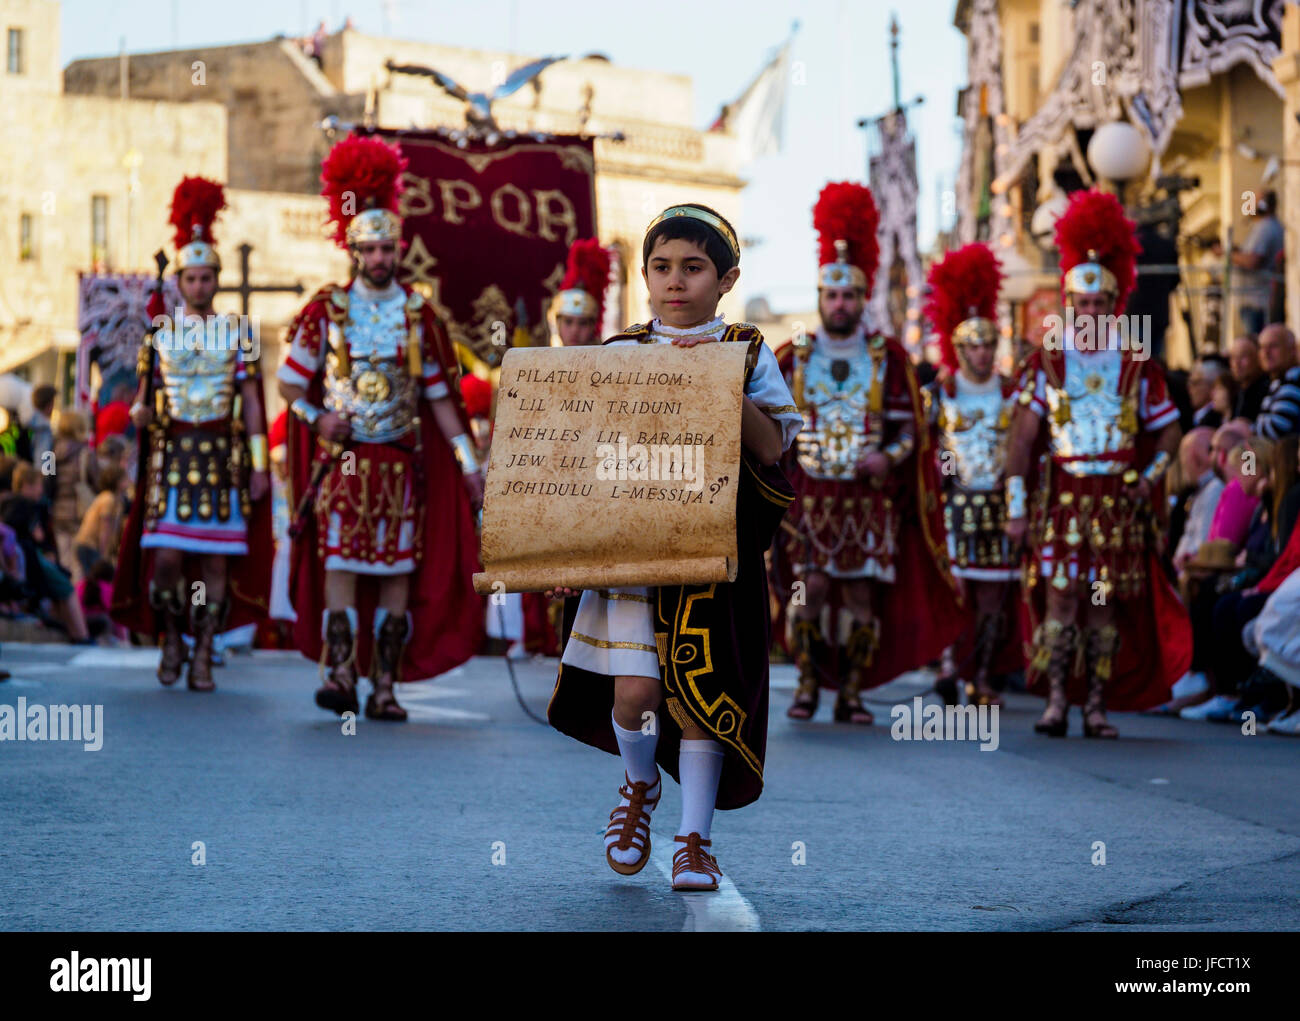 Inhabitants of the town of Zejtun / Malta had their traditional Good Friday procession / religious church parade in front of their church Stock Photo